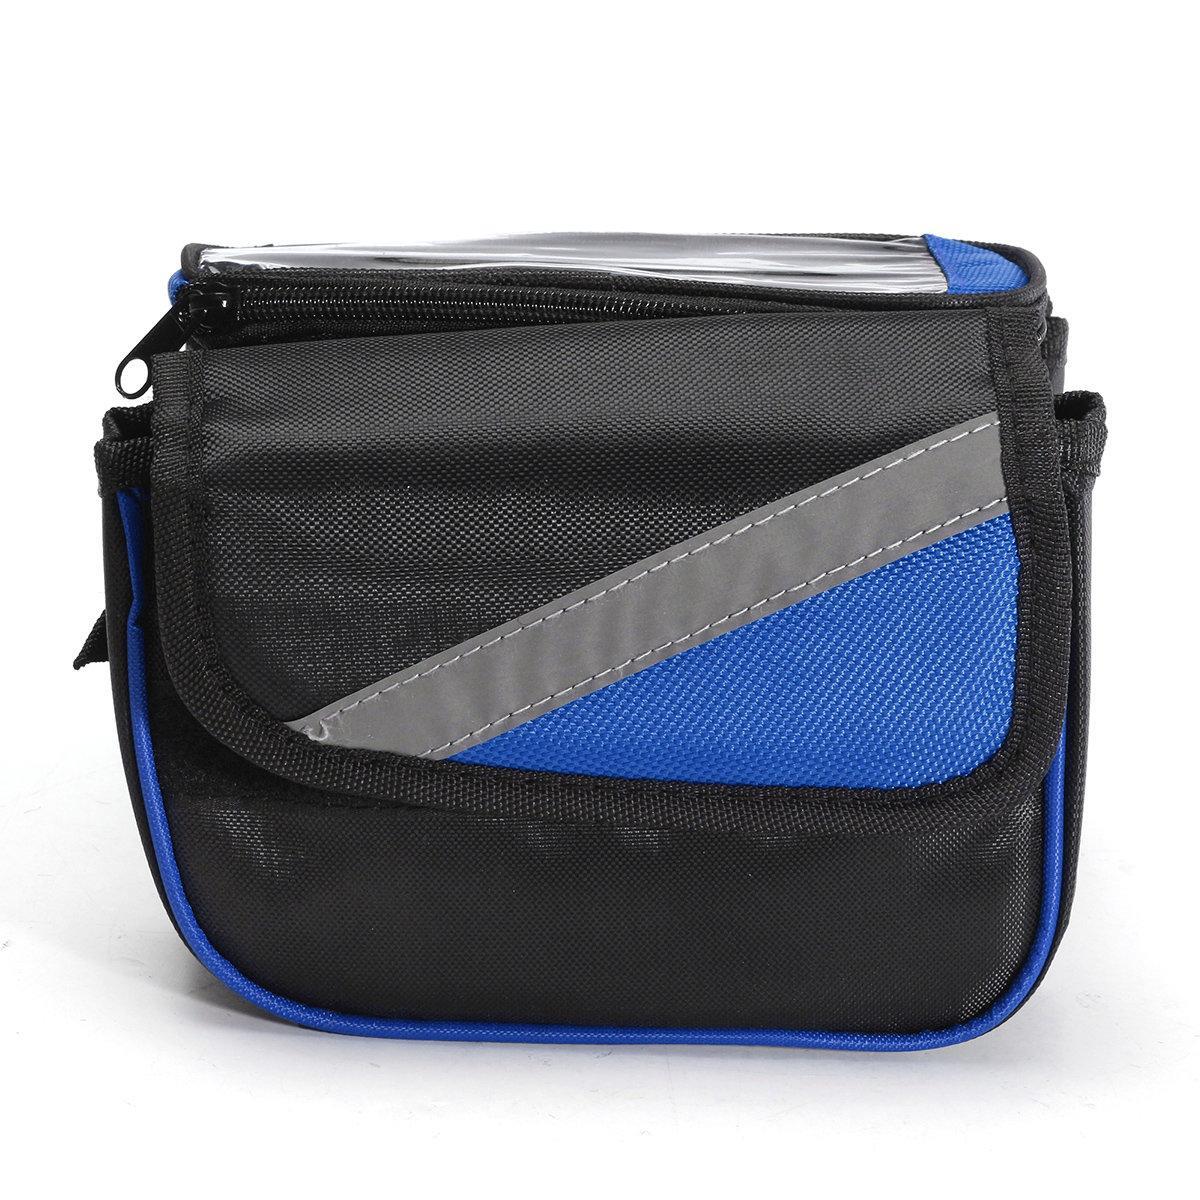 Bicycle Front Frame Tube Touch Screen Saddle Bag Pouch Holder For Under 5.7 Inch Mobile Phone BLUE COLOR